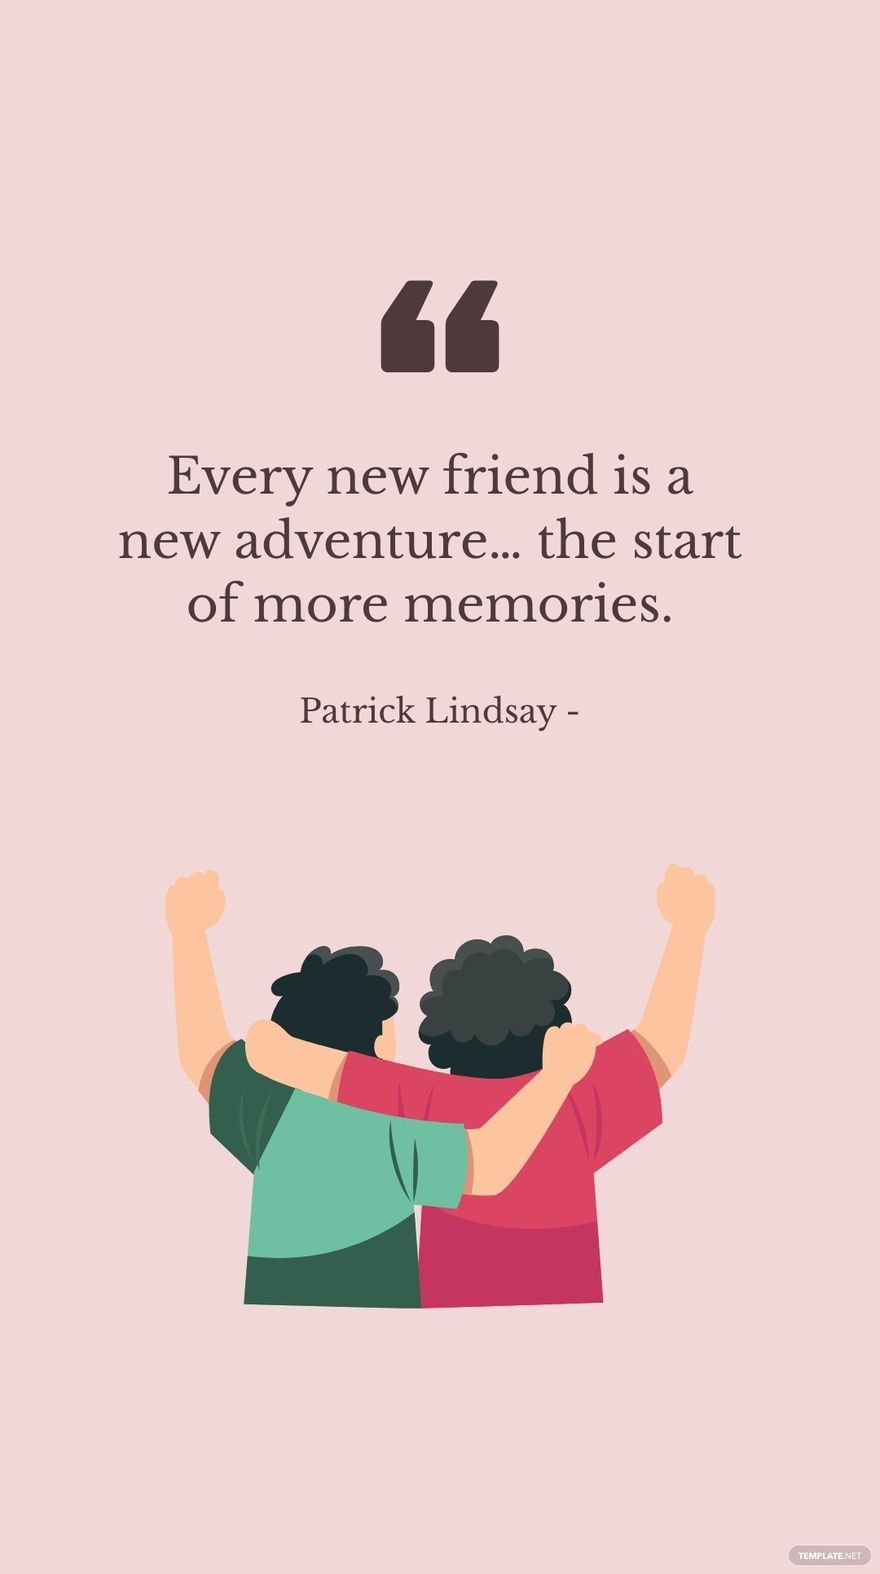 Free Patrick Lindsay - Every new friend is a new adventure… the start of more memories. in JPG